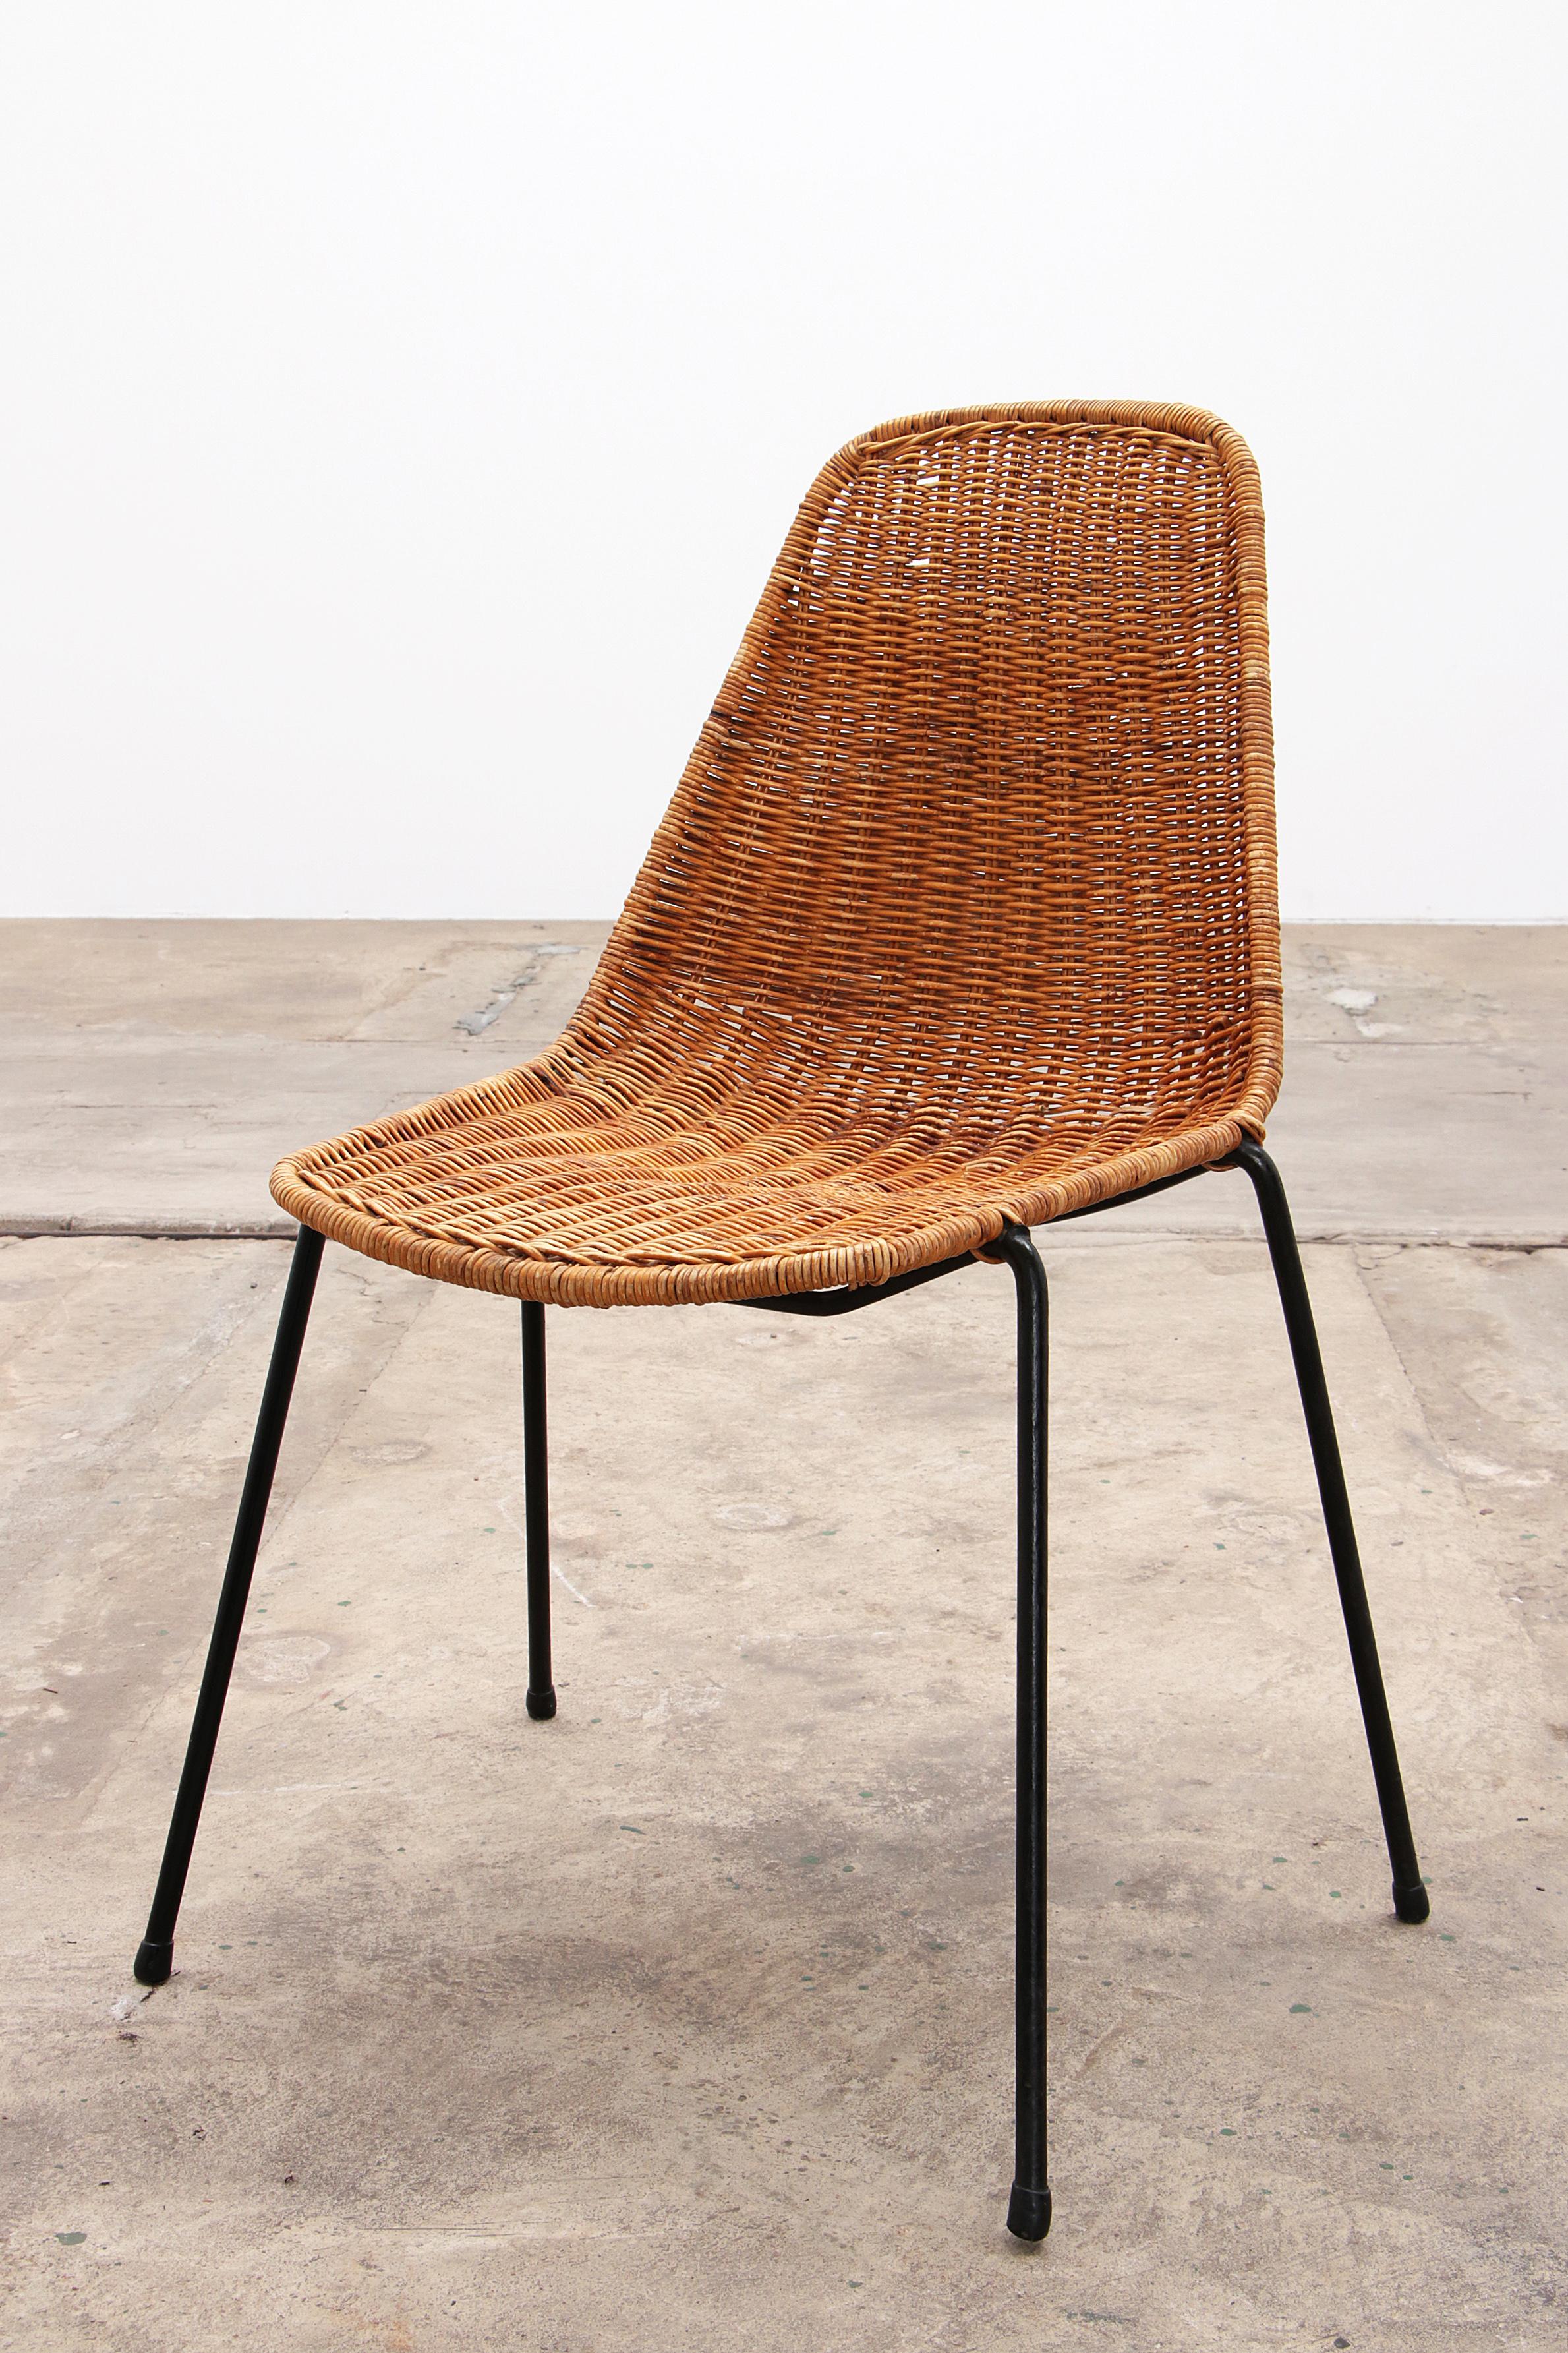 Midcentury Rattan Basket Chair by Gian Franco Legler In Good Condition For Sale In Oostrum-Venray, NL